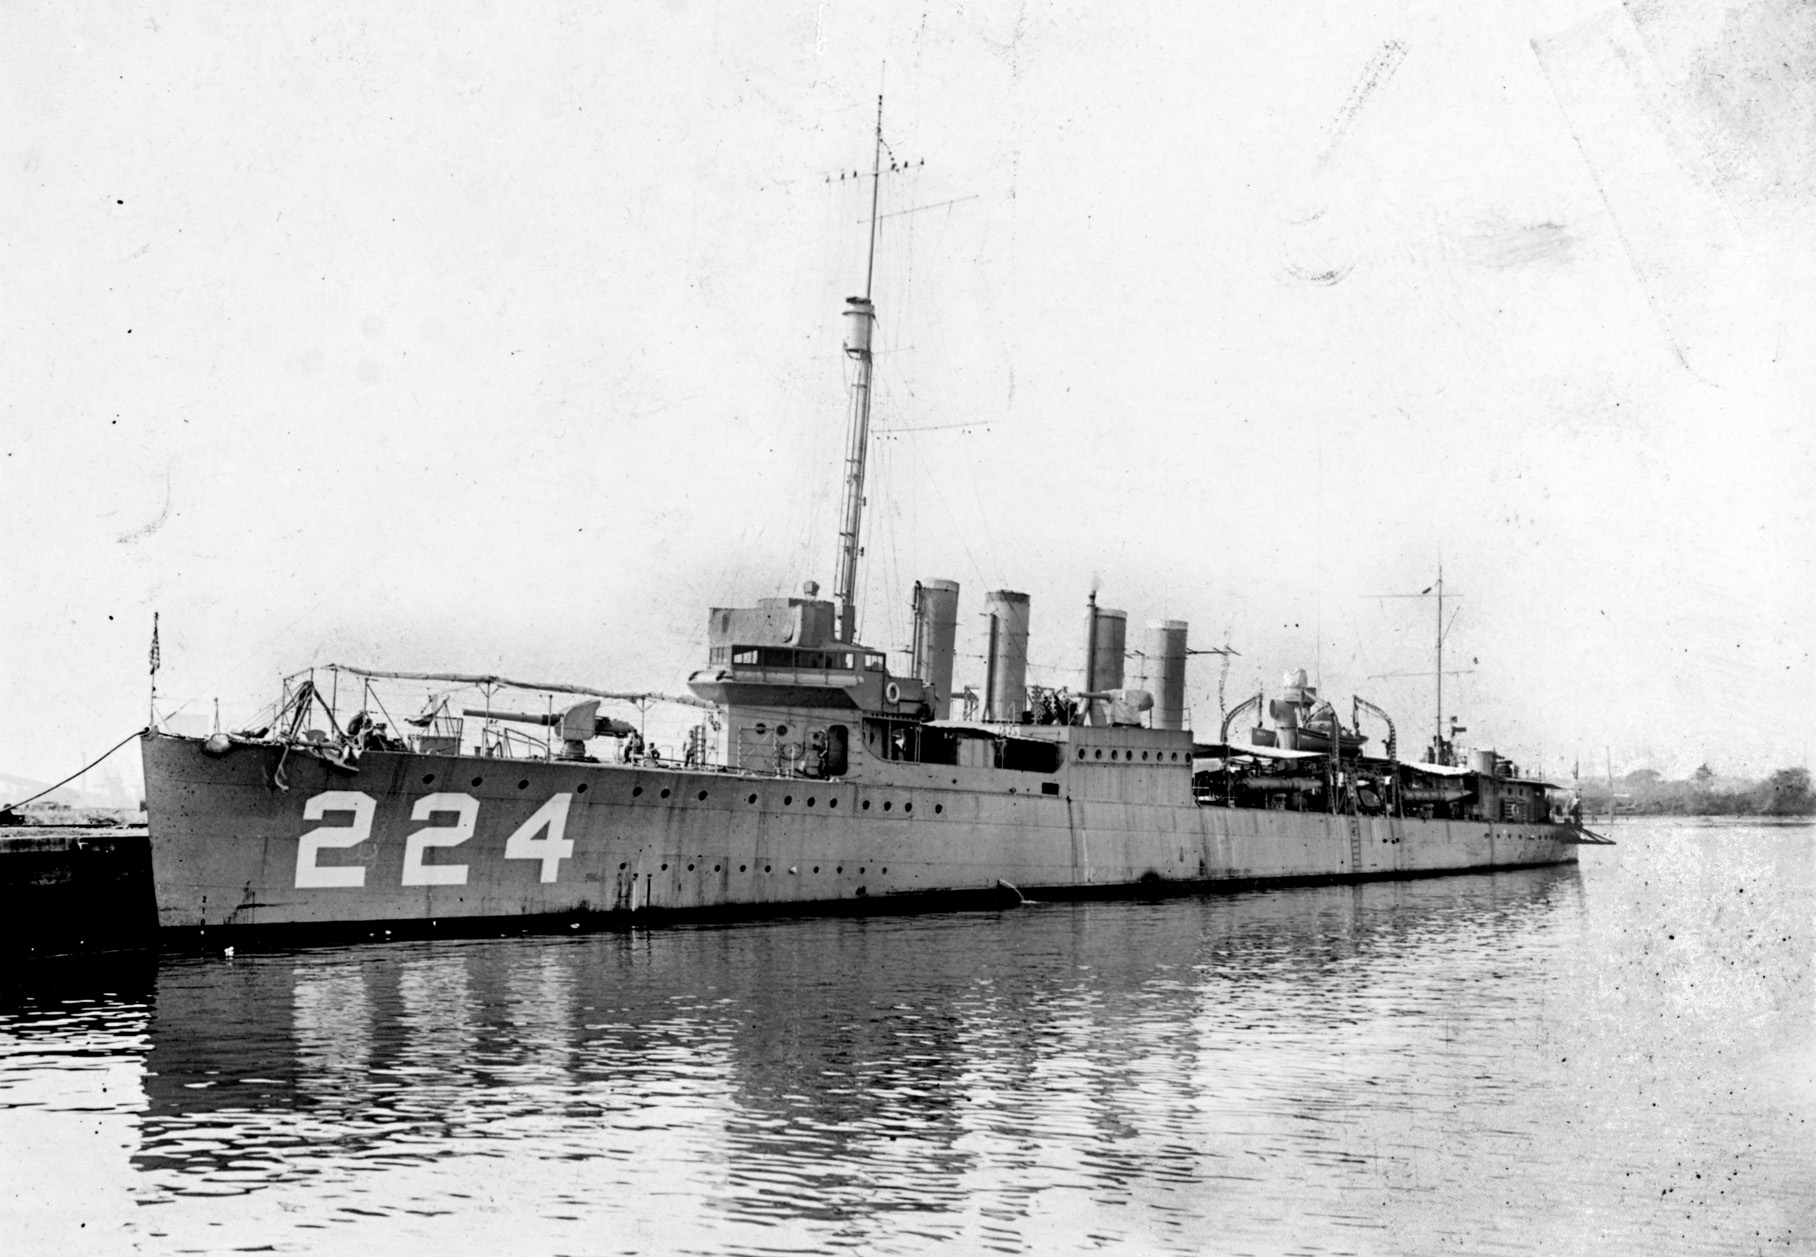 Sporting her original four stacks, the destroyer USS Stewart lies moored in harbor in this pre-World War II photograph.  